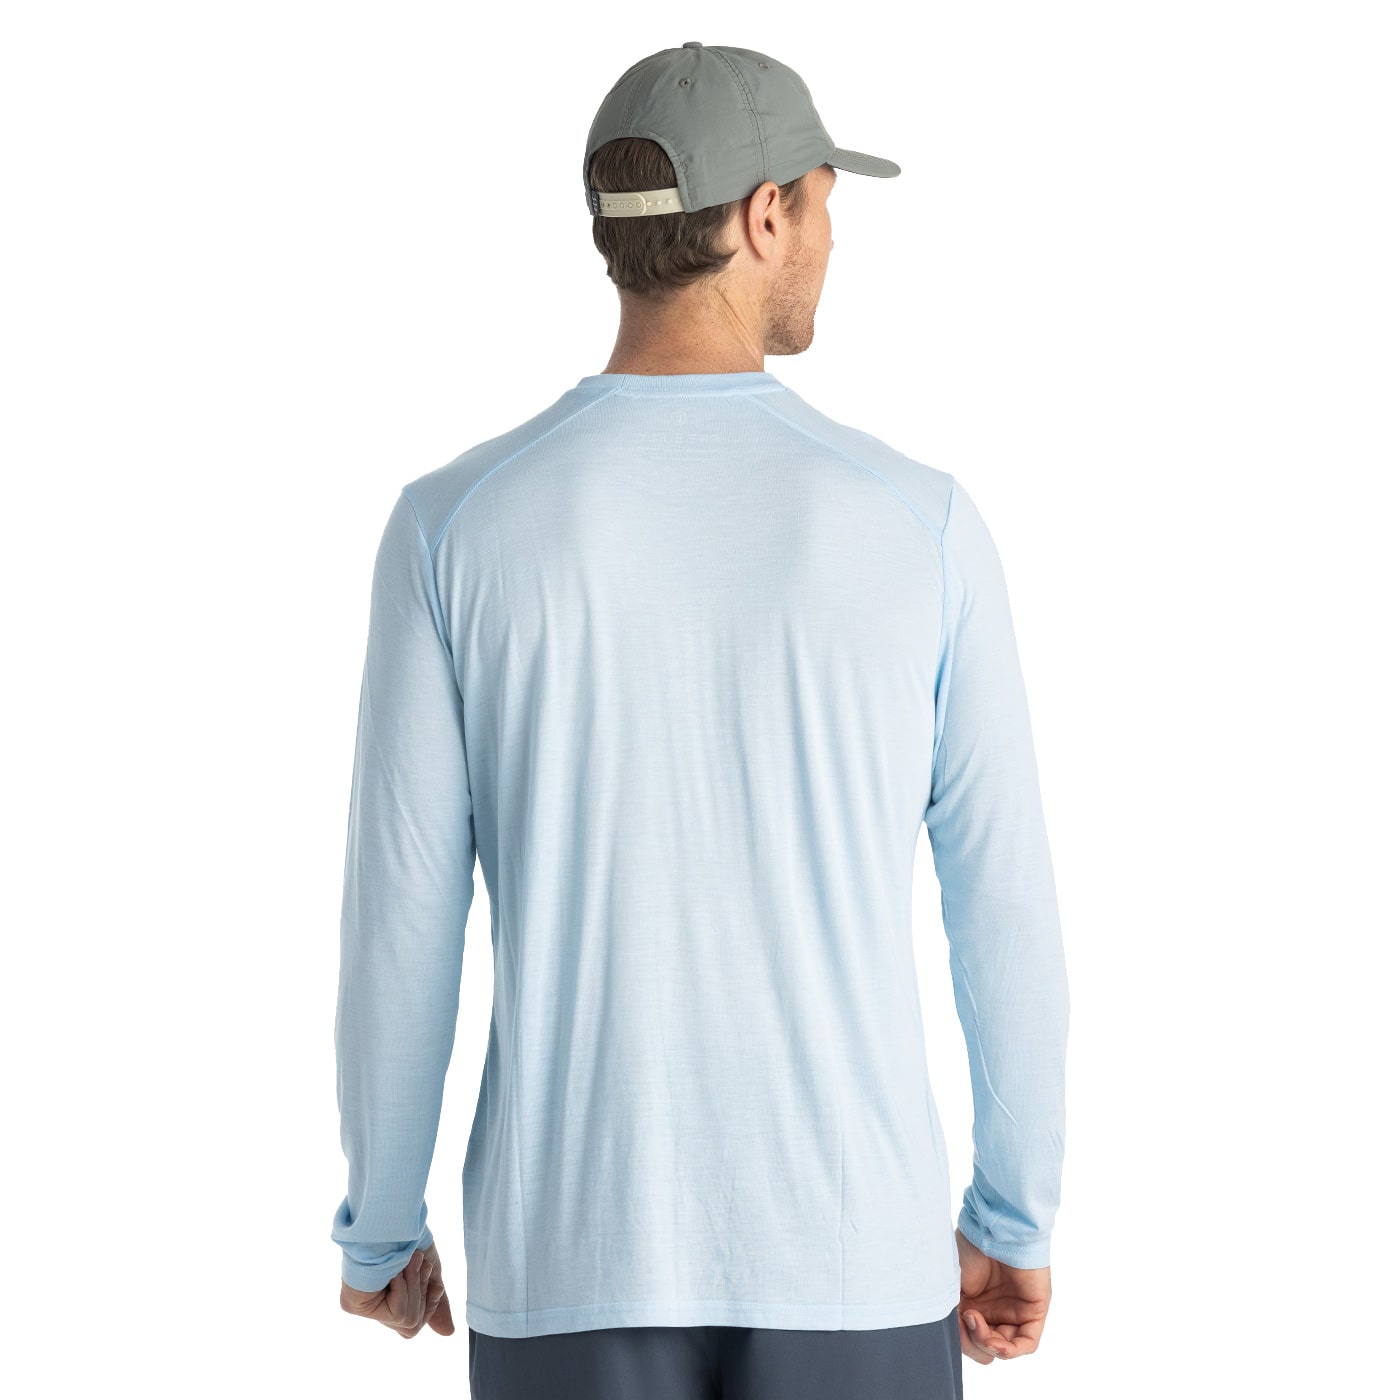 The Best Long Sleeve Sports Tops of 2023